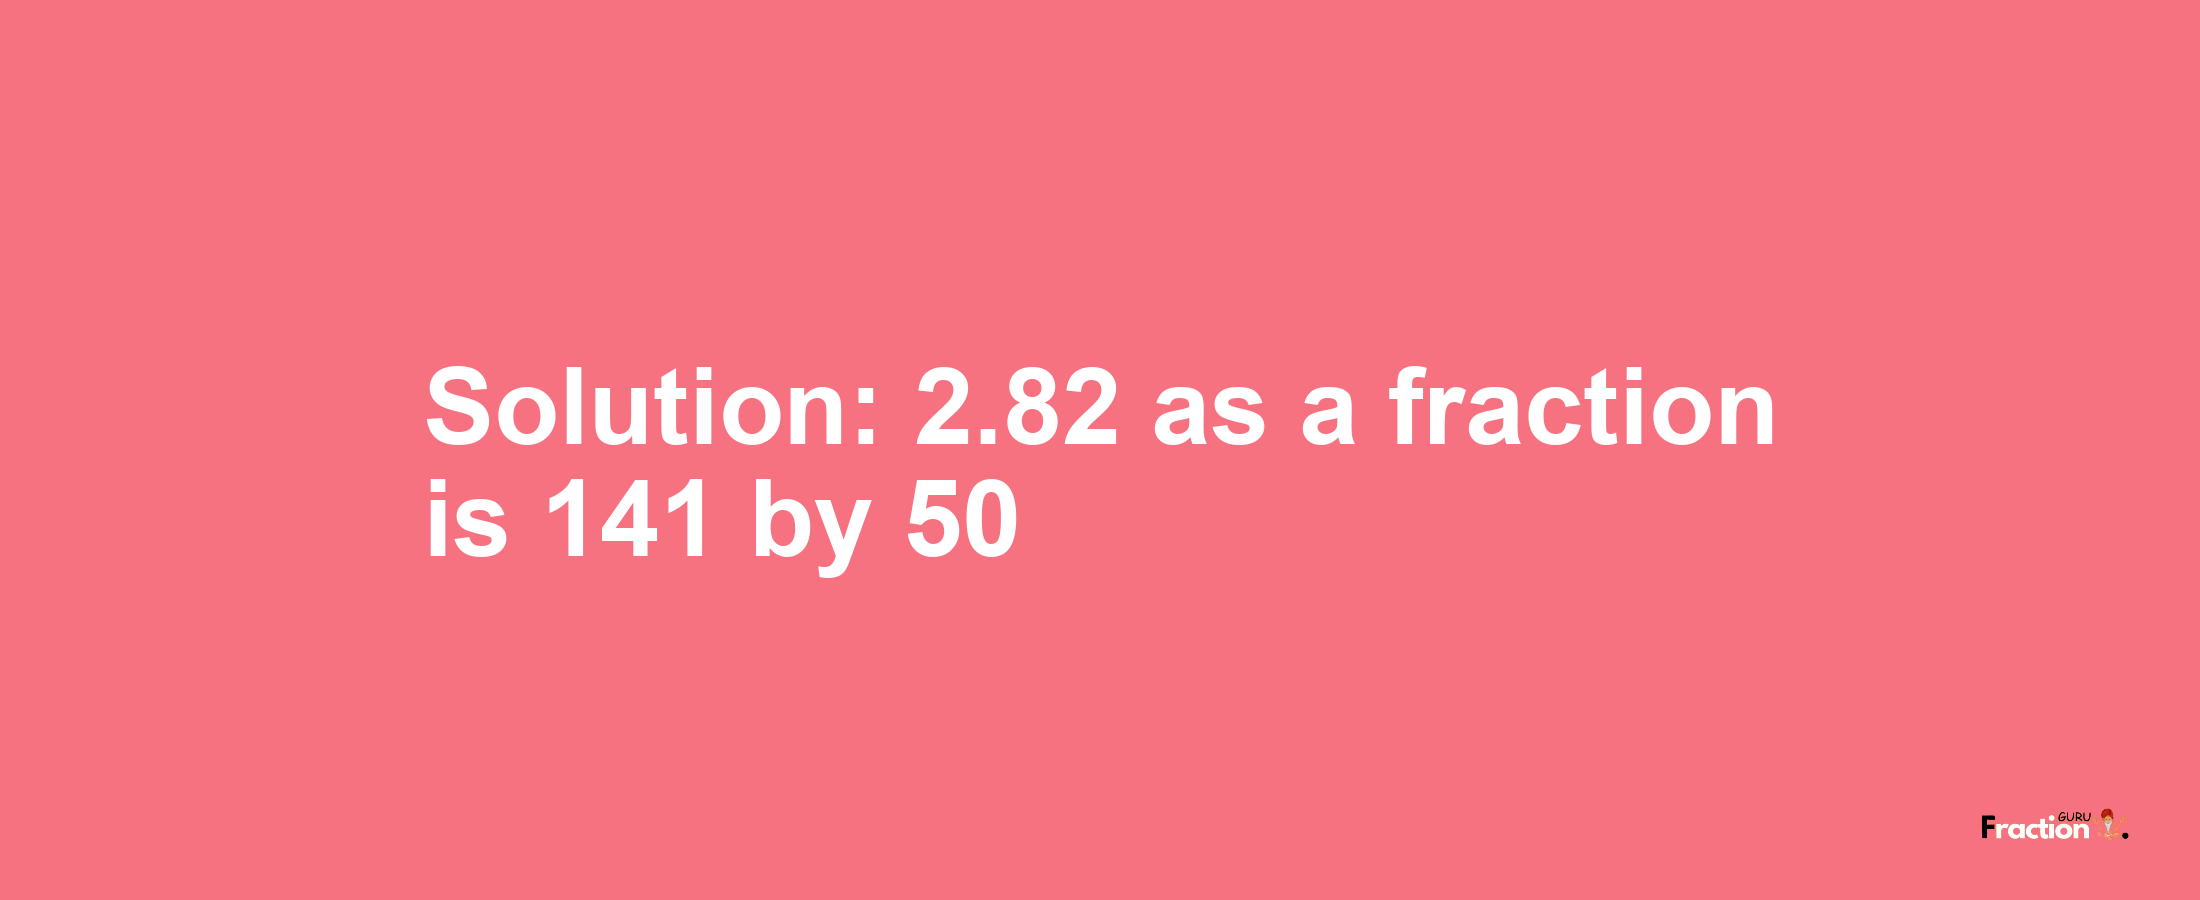 Solution:2.82 as a fraction is 141/50